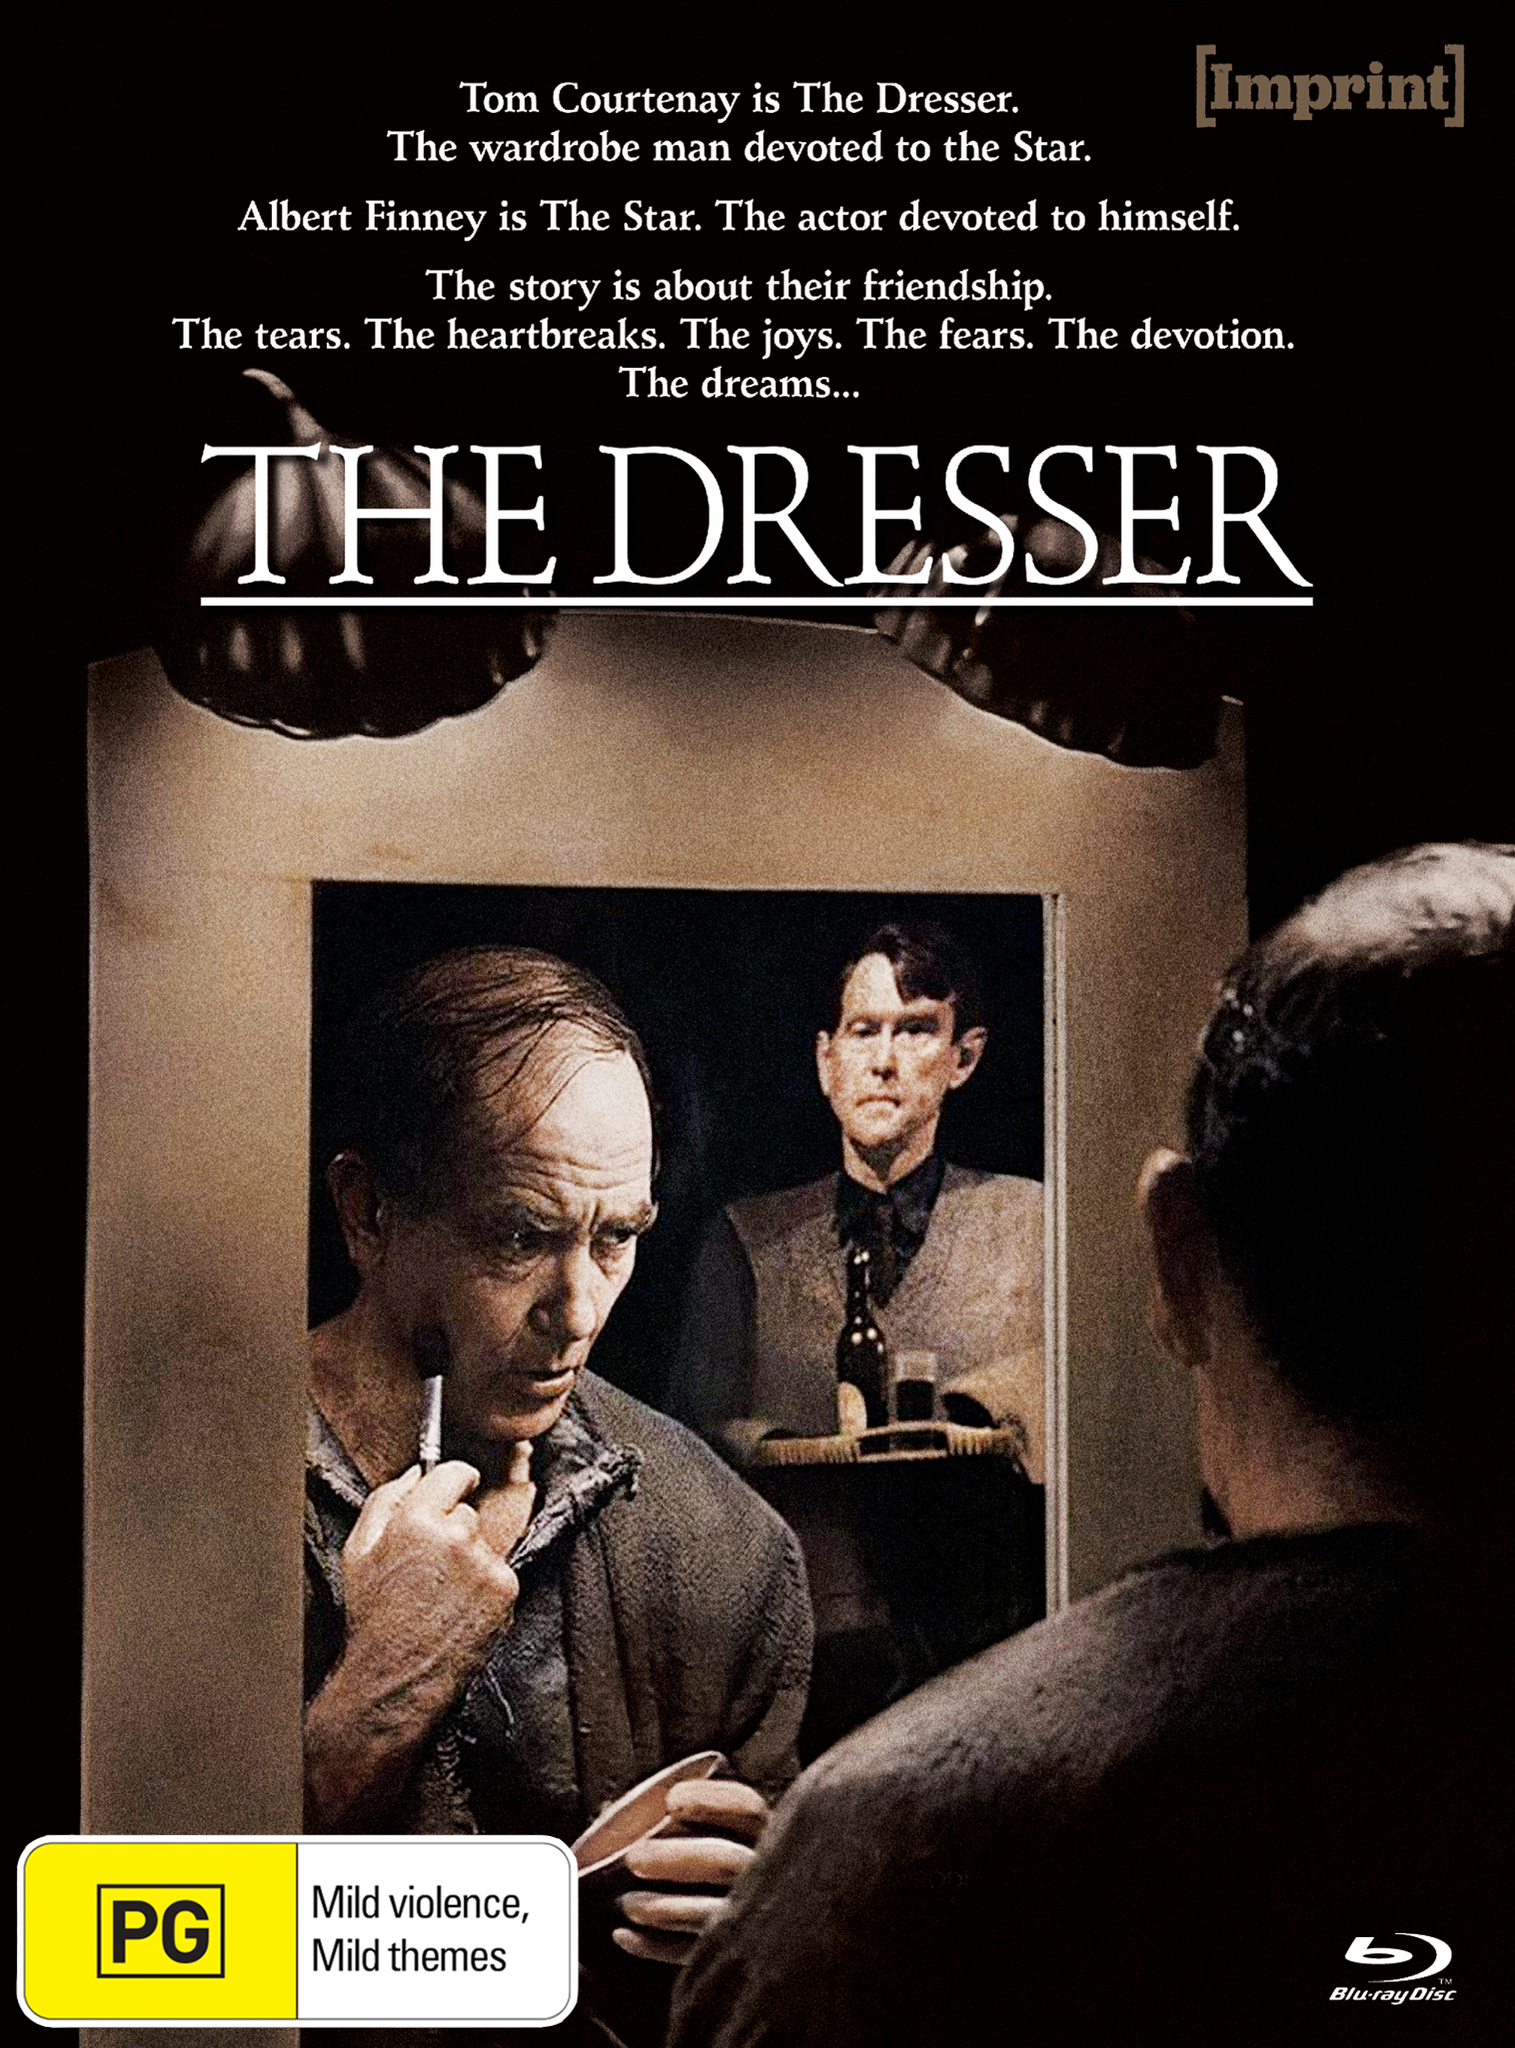 THE DRESSER (IMPRINT COLLECTION #290) - BLU-RAY